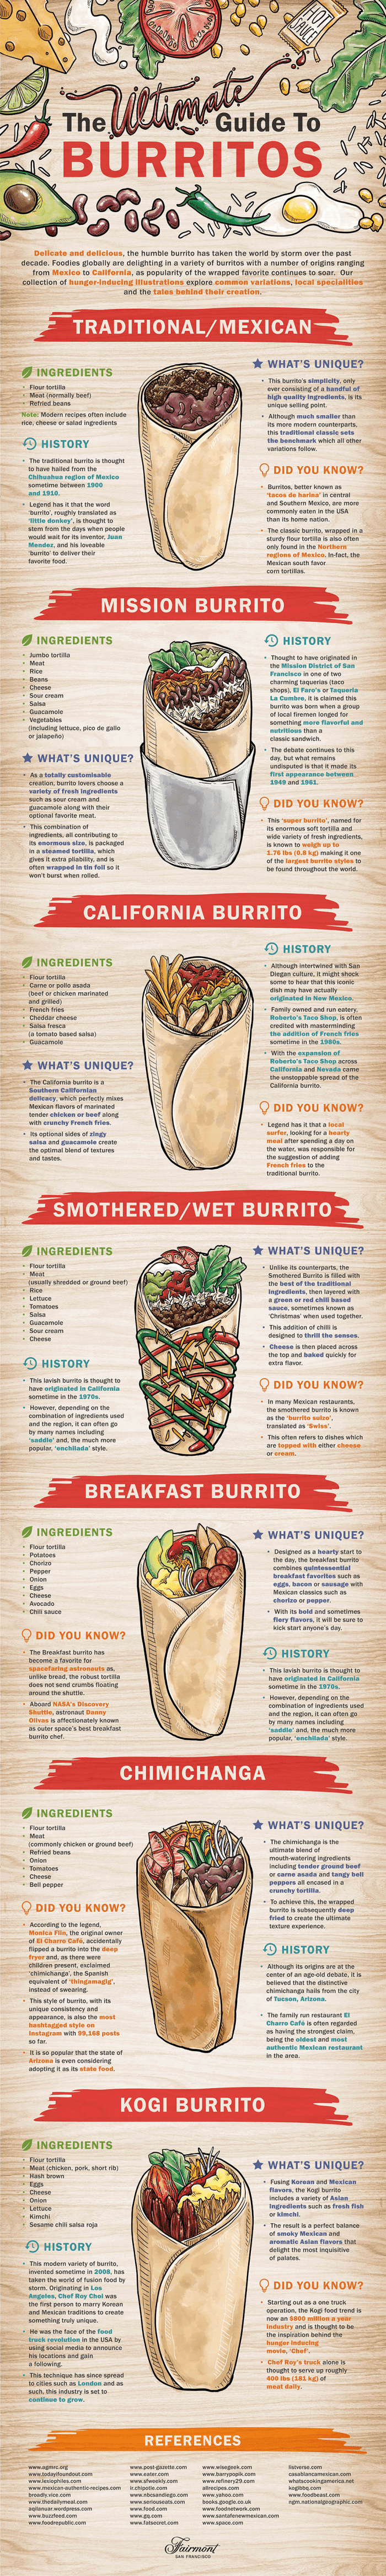 Infographic showing amazing types of burritos with all recipes and some interesting facts about them